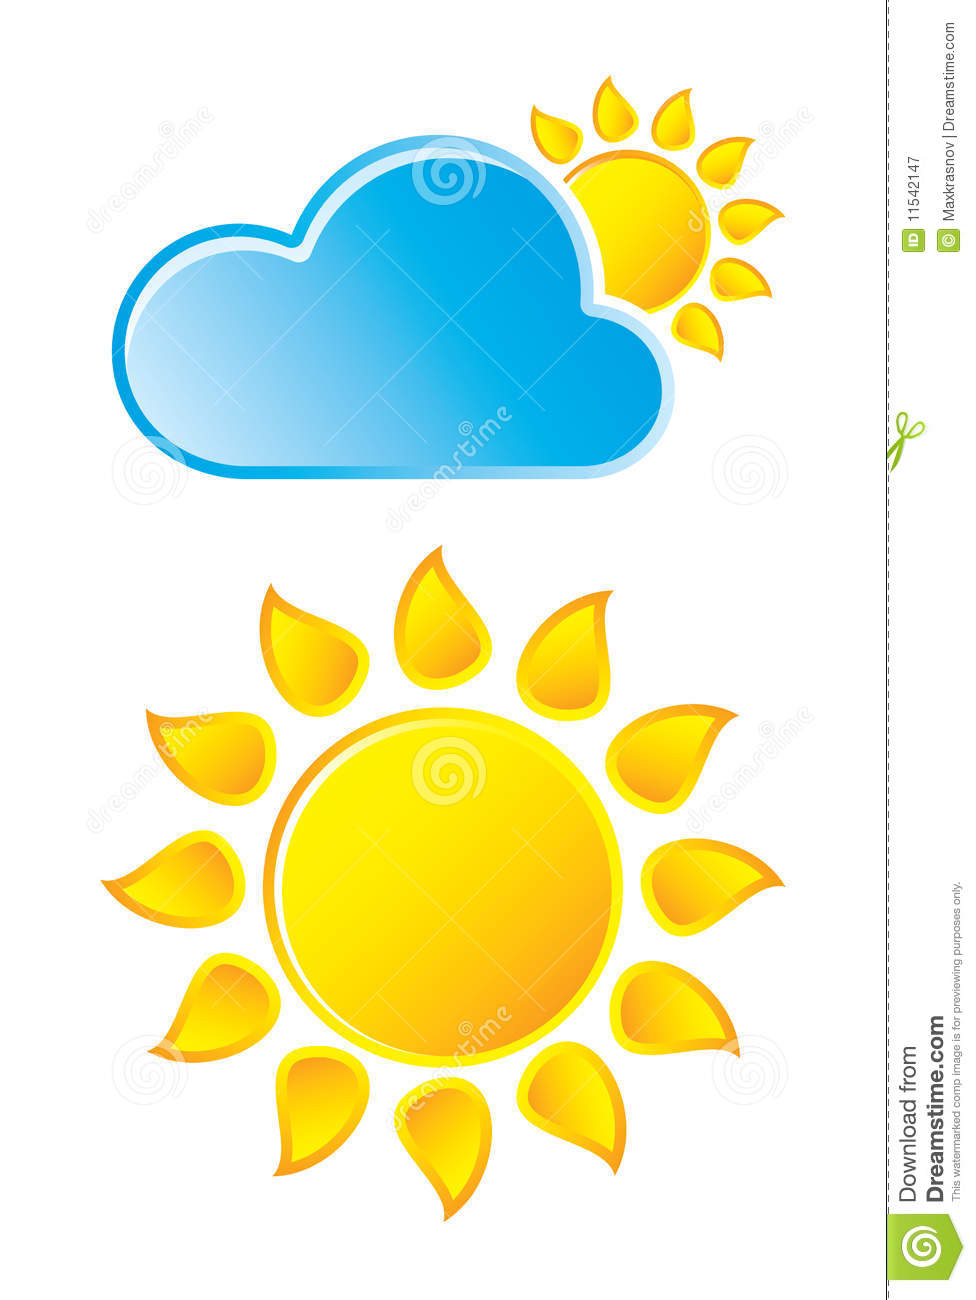 Royalty Free Weather Icons